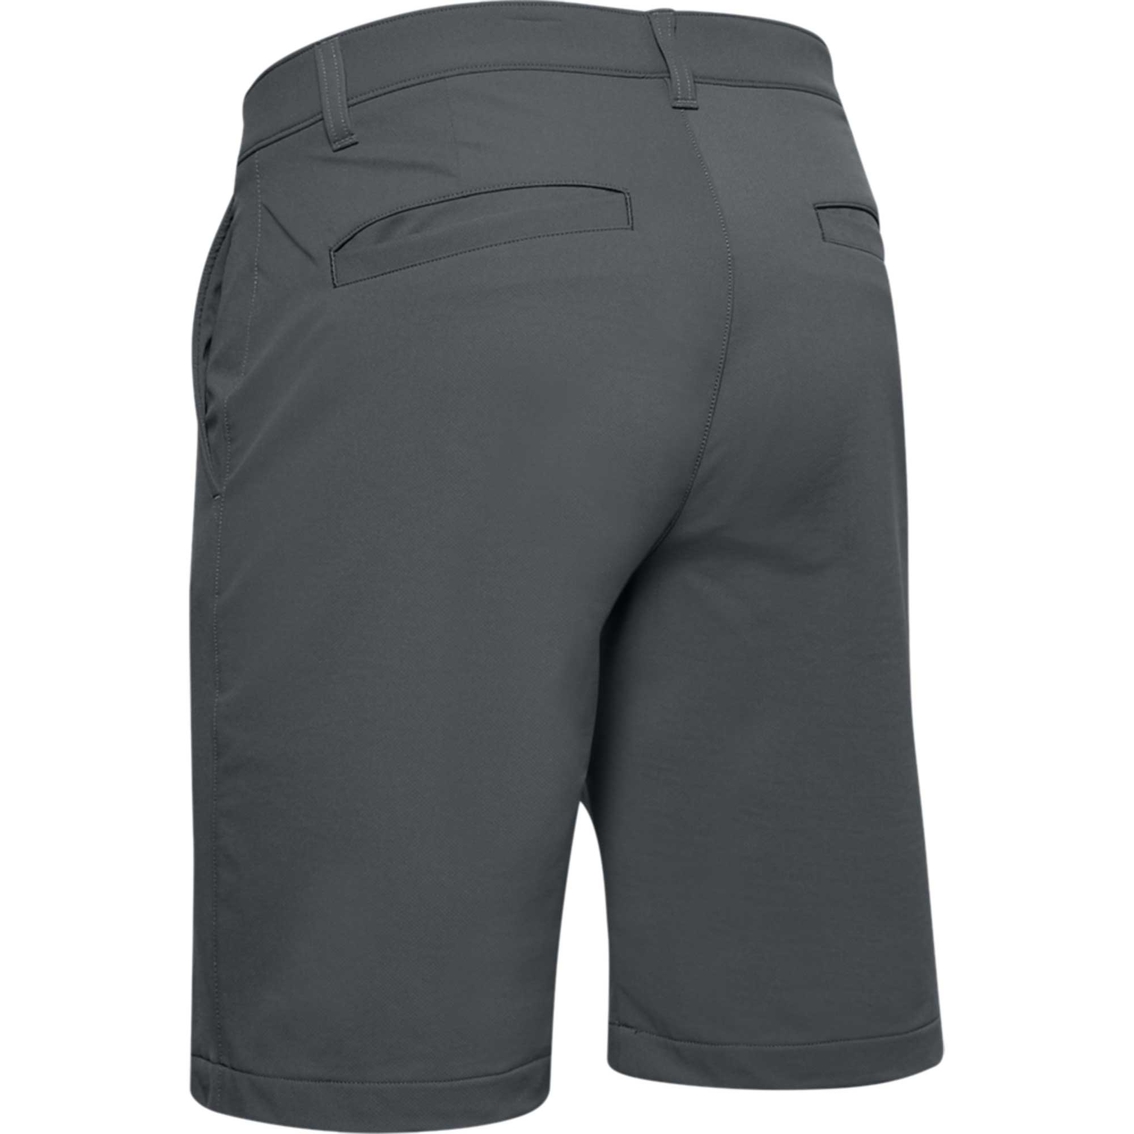 Under Armour 10 in. Tech Shorts - Image 8 of 8